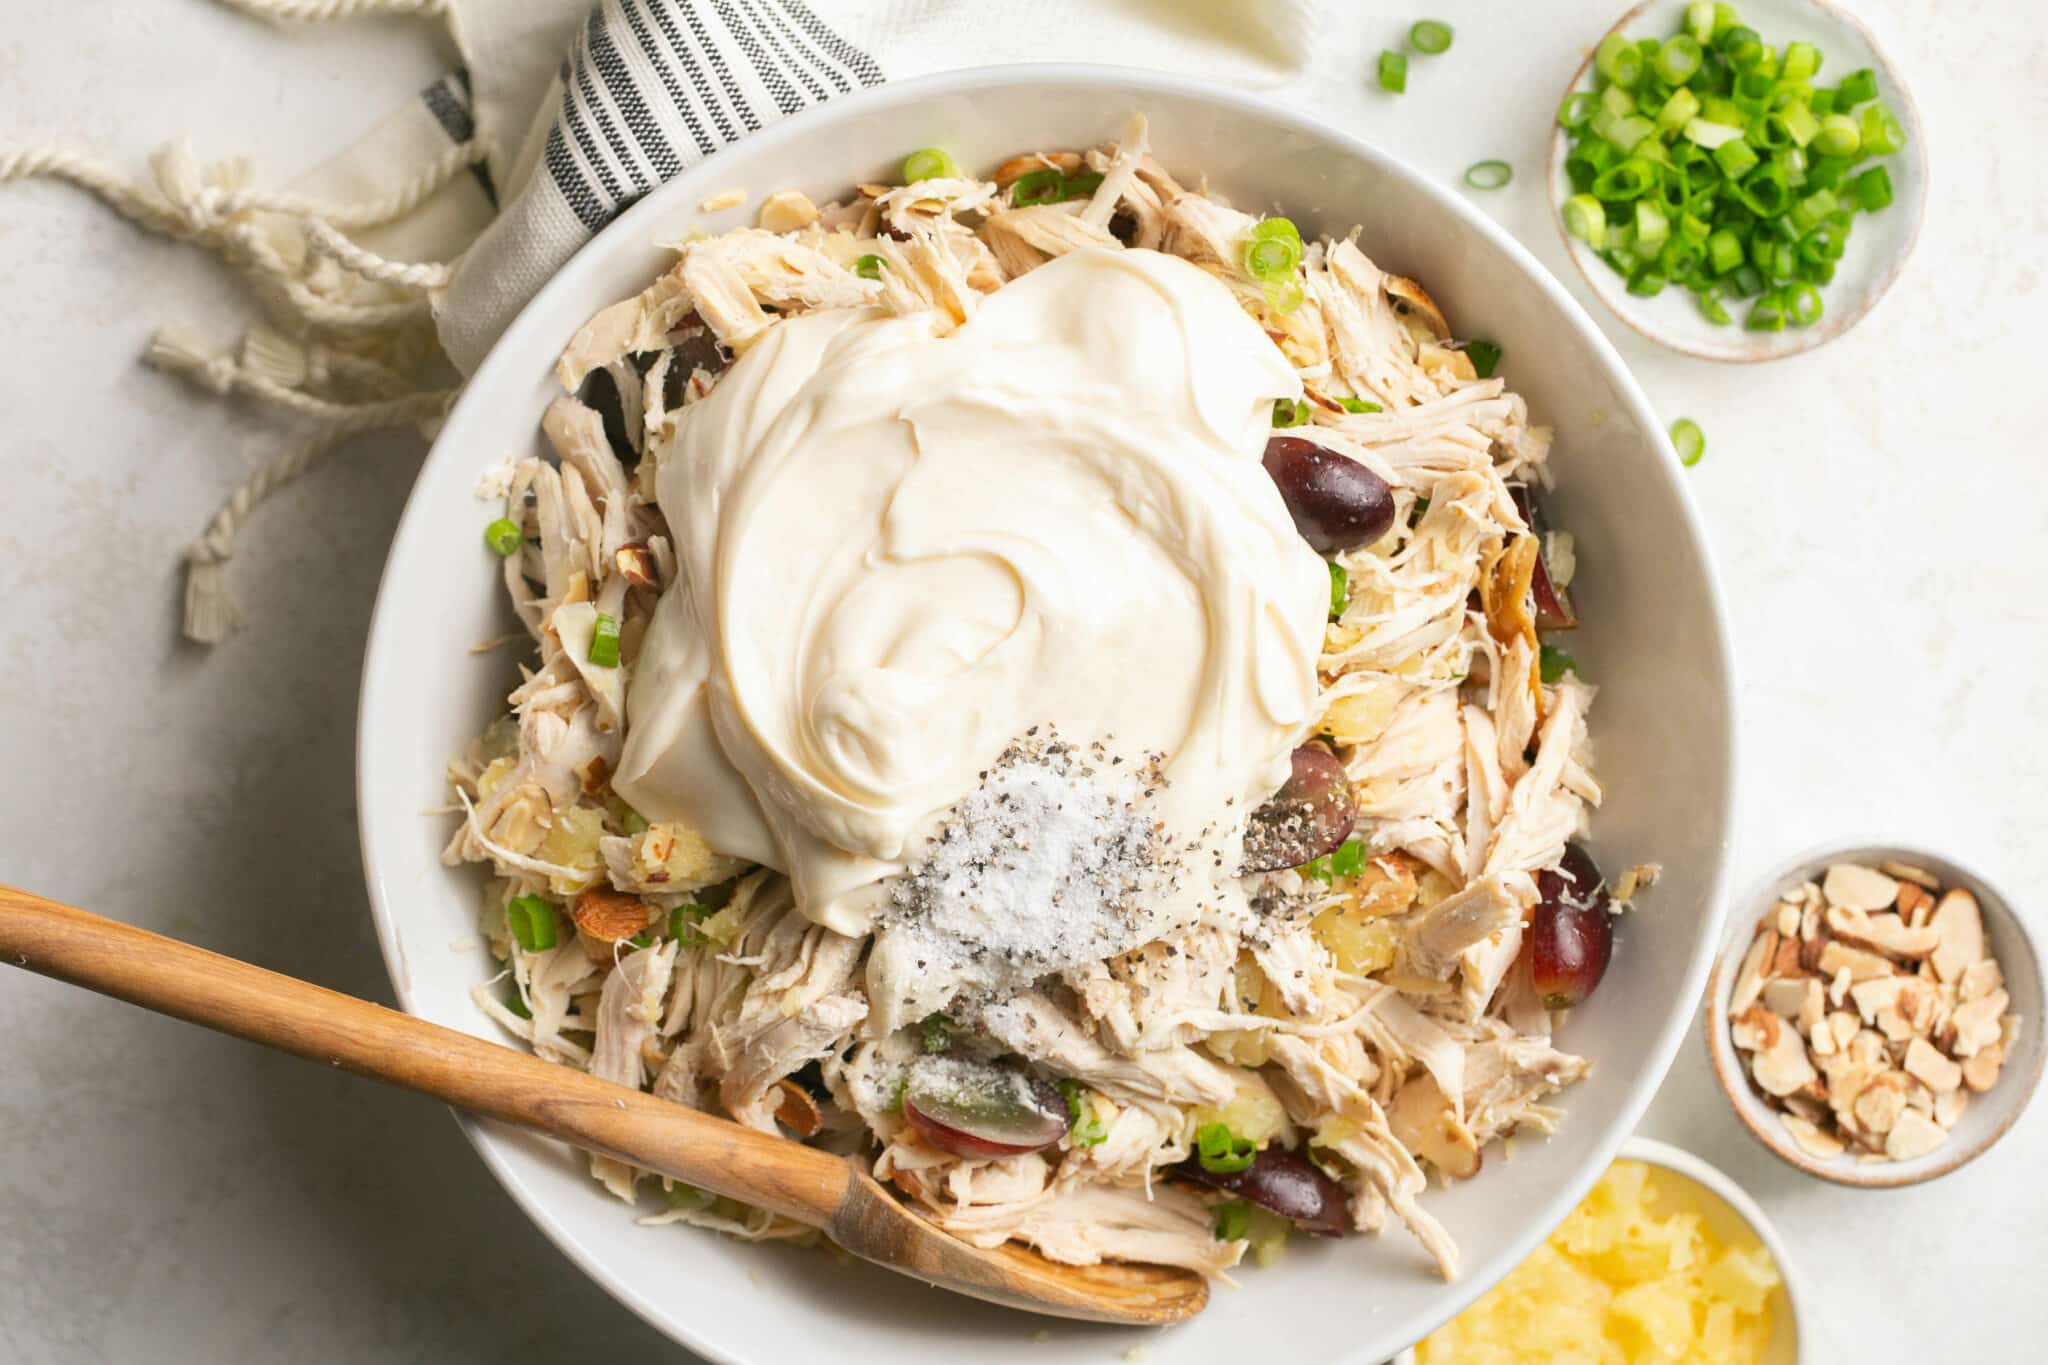 Adding mayo to bowl with shredded chicken.